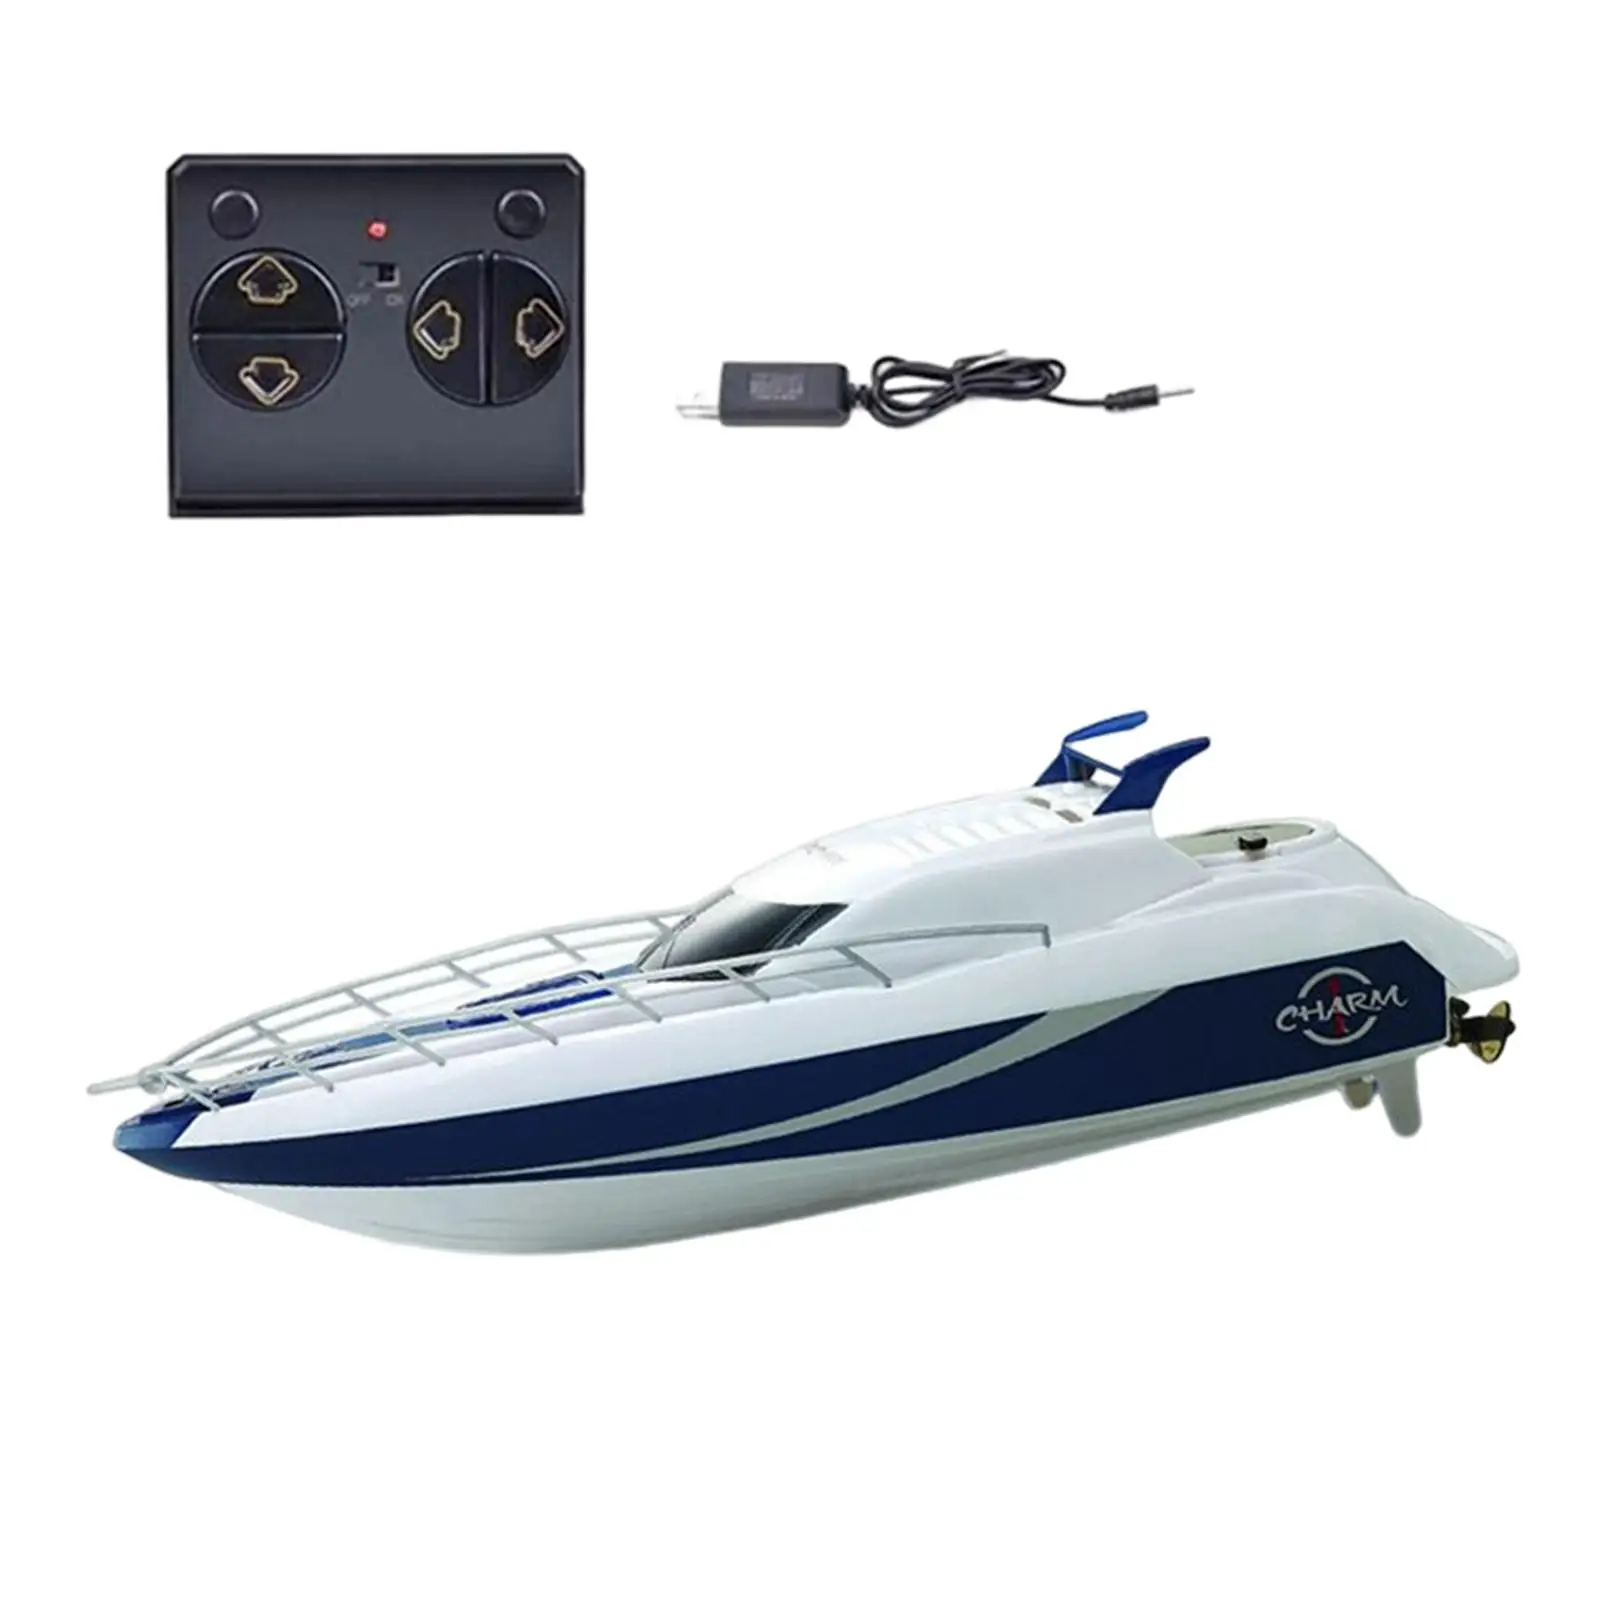 Remote Control Boat Toy USB Rechargeable Boat for Girls Beginner